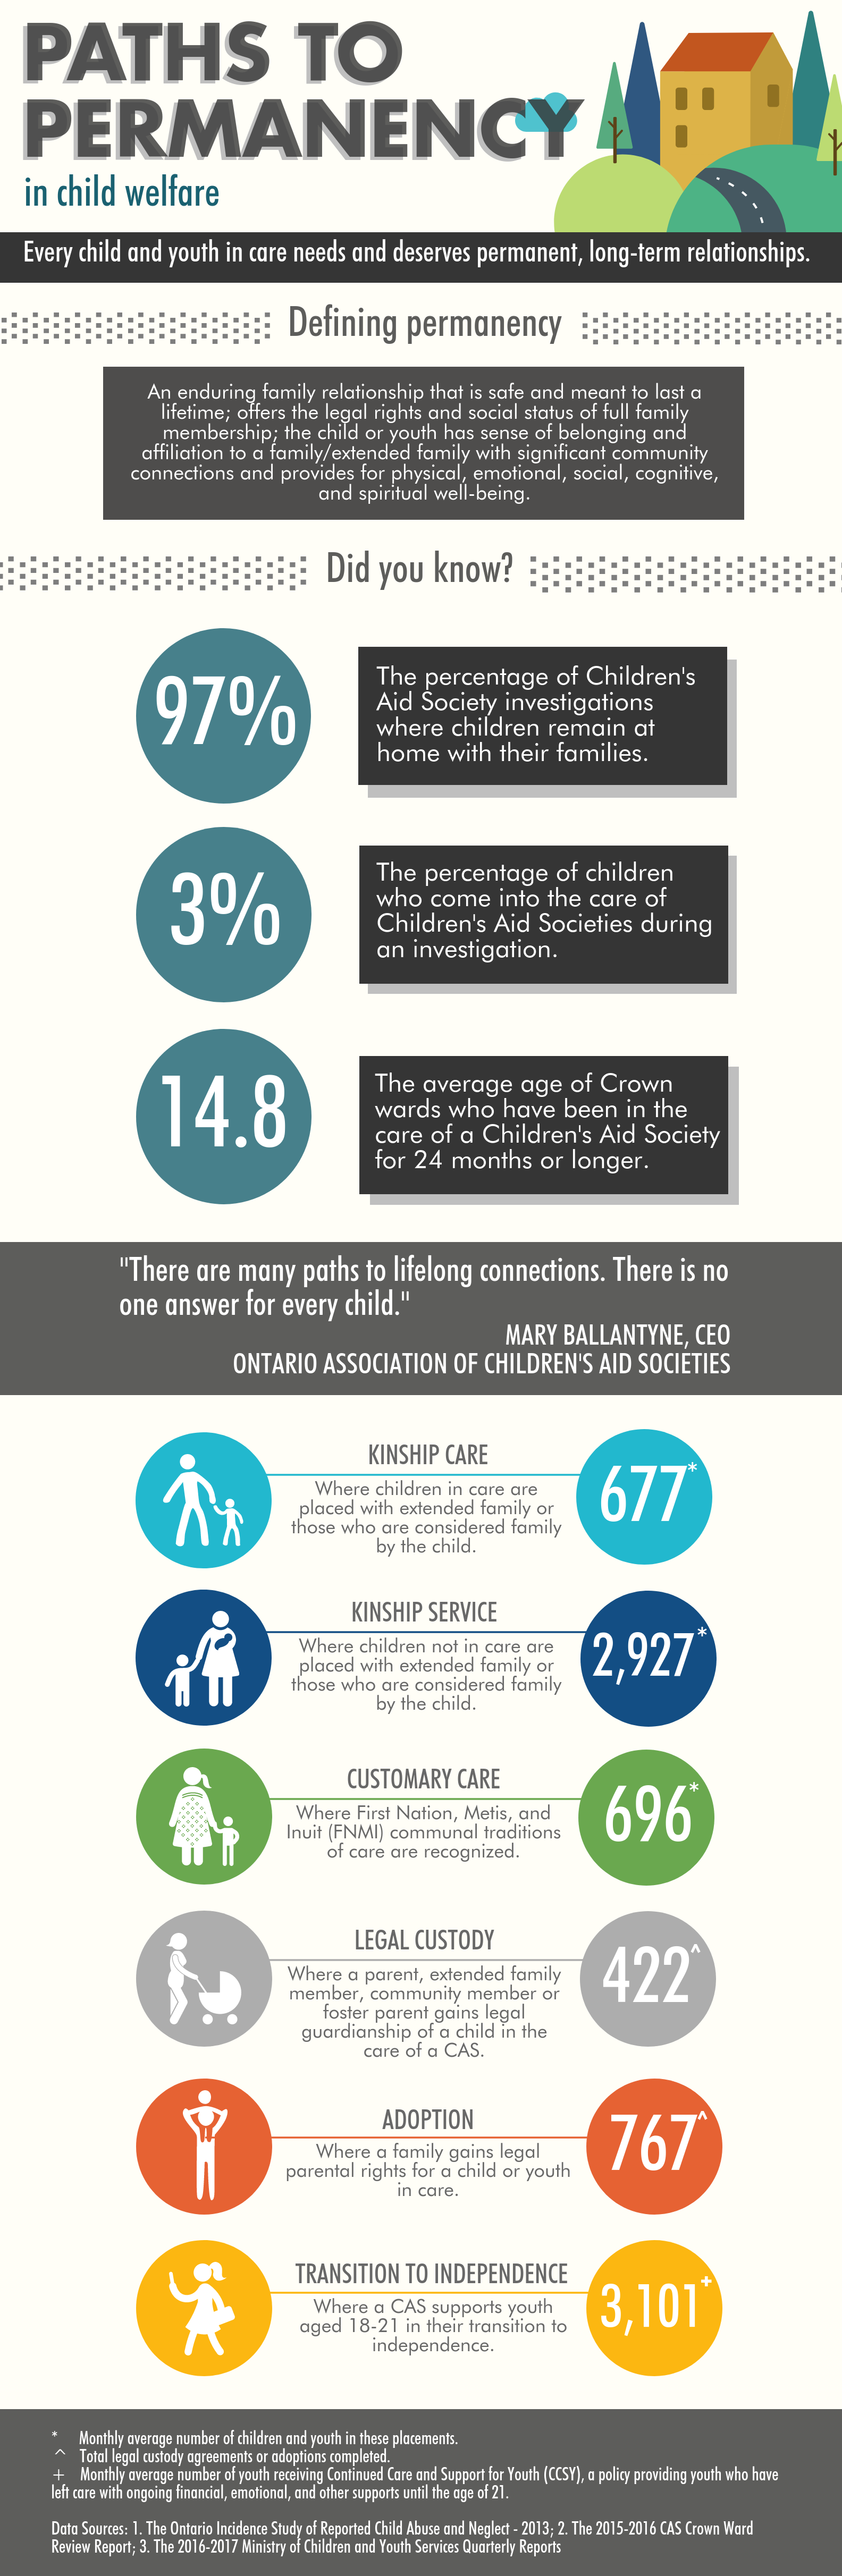 It's Adoption Awareness Month: Let's explore the various paths to permanency in child welfare